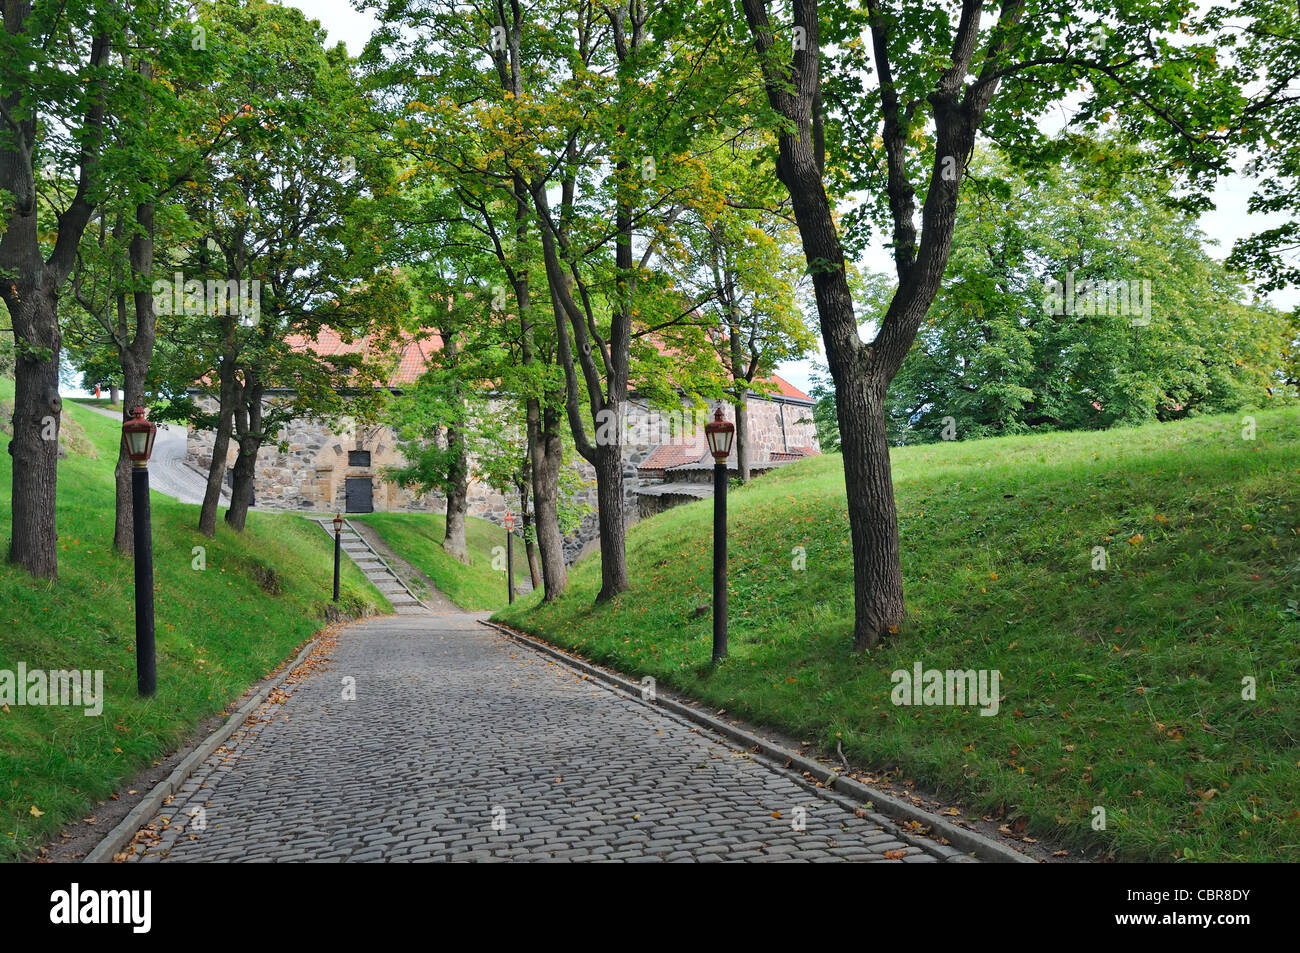 Oslo: fragments of the historical heritage of Norway - Fortress Akershus Stock Photo